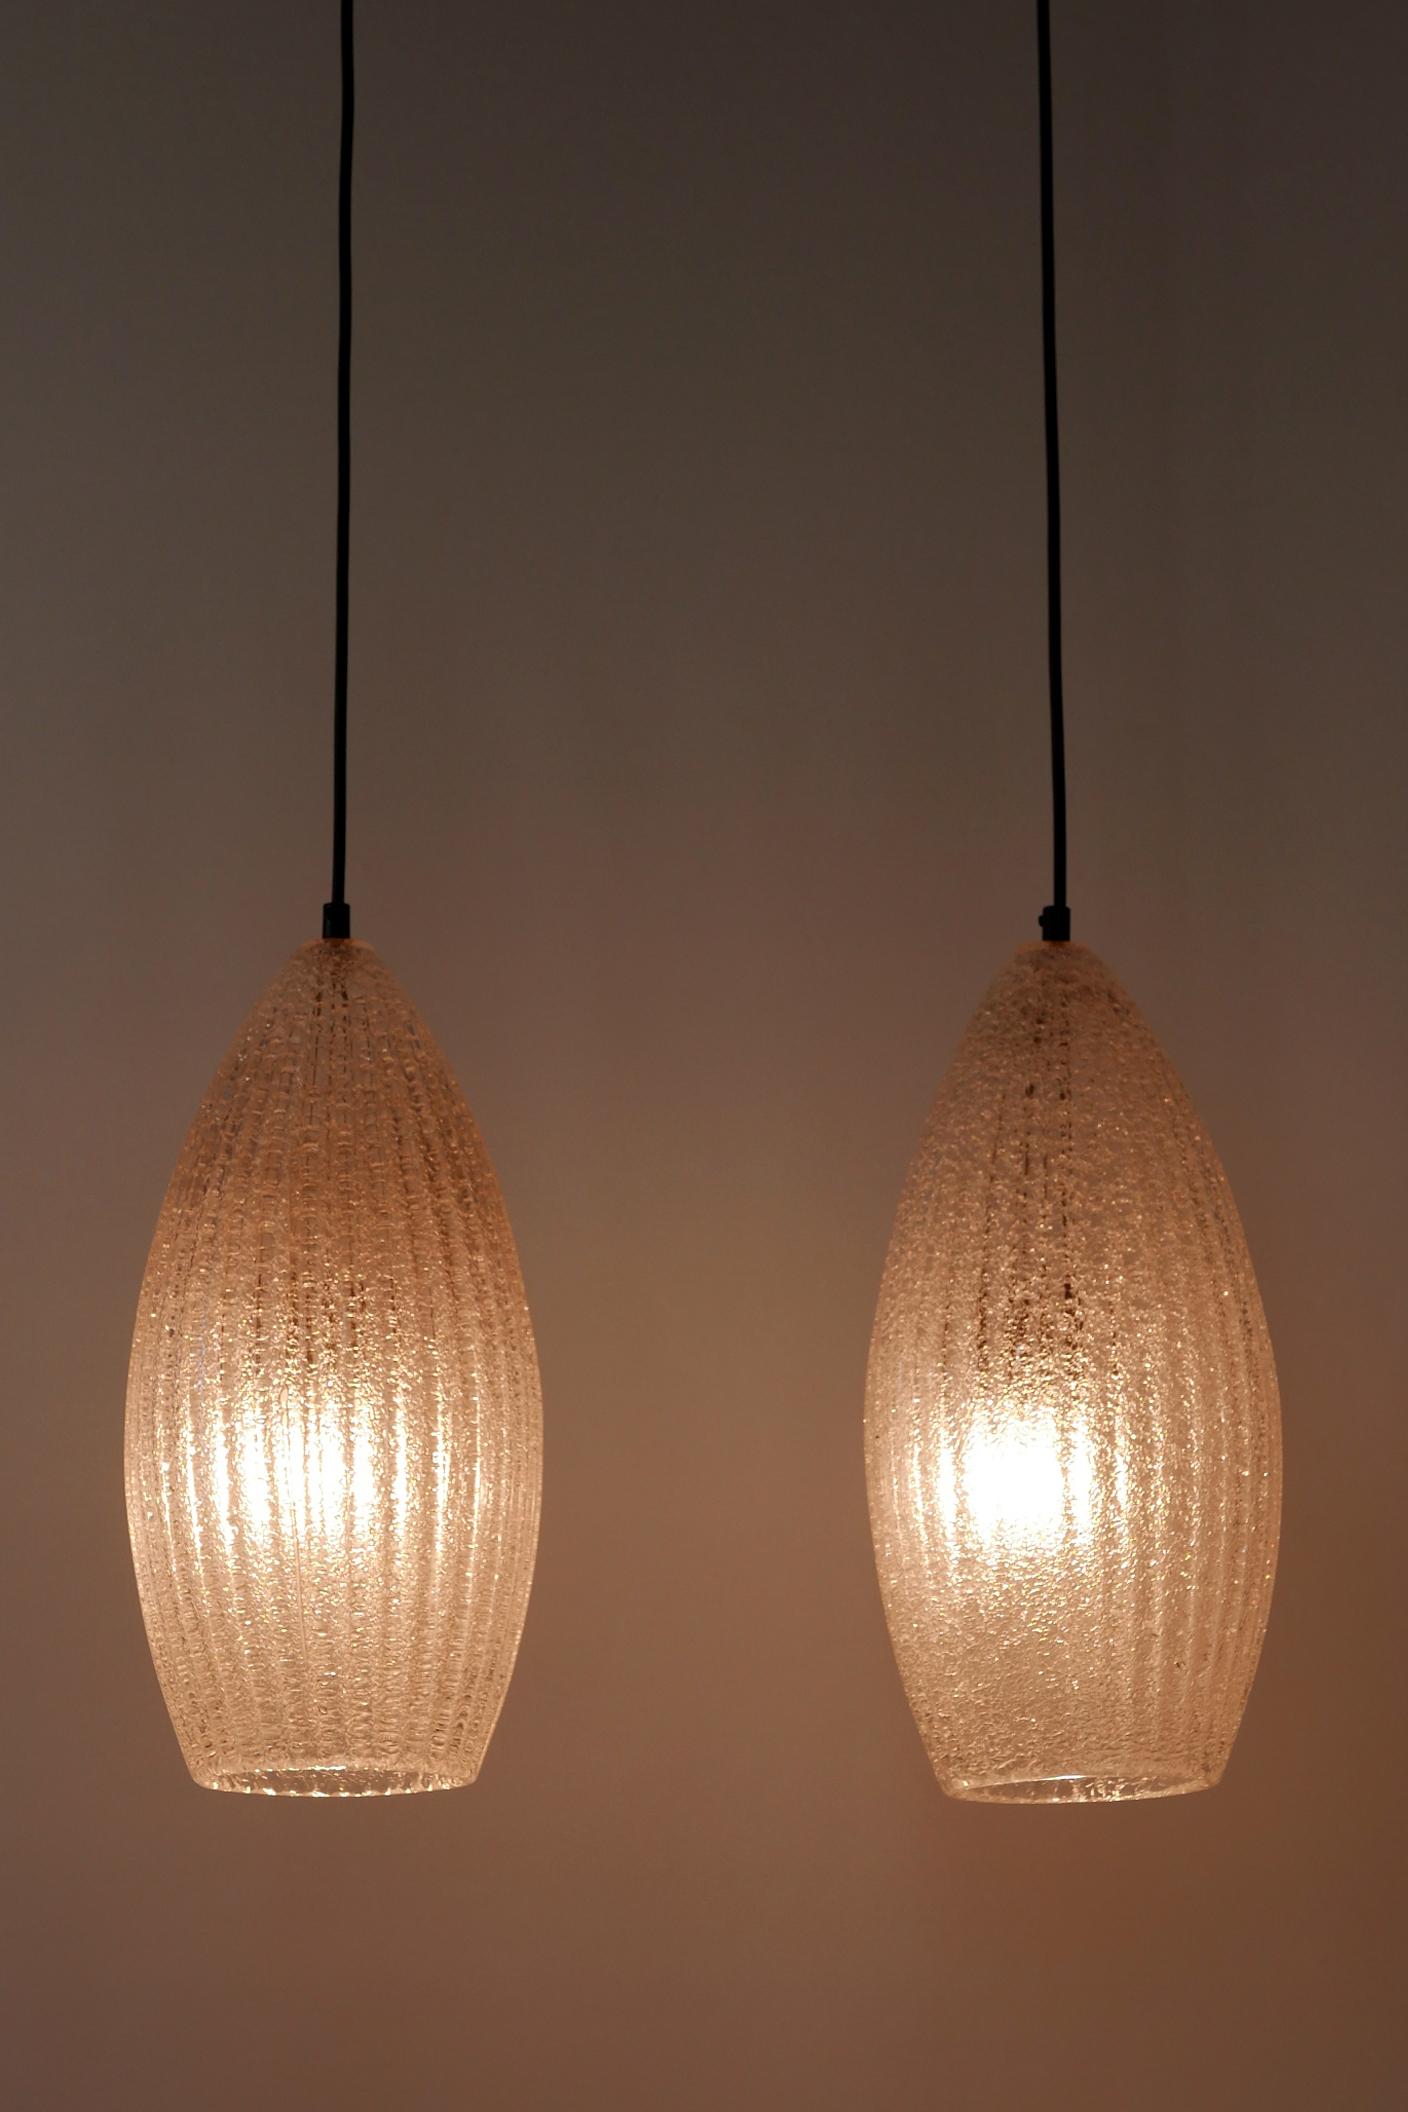 Set of two rare and elegant Mid-Century Modern pendant lamps. Manufactured probably in 1960s in Germany.

Executed in thick textured ice glass, each lamp comes with 1 x E27 / E26 Edison screw fit bulb holder, is rewired and in working condition.